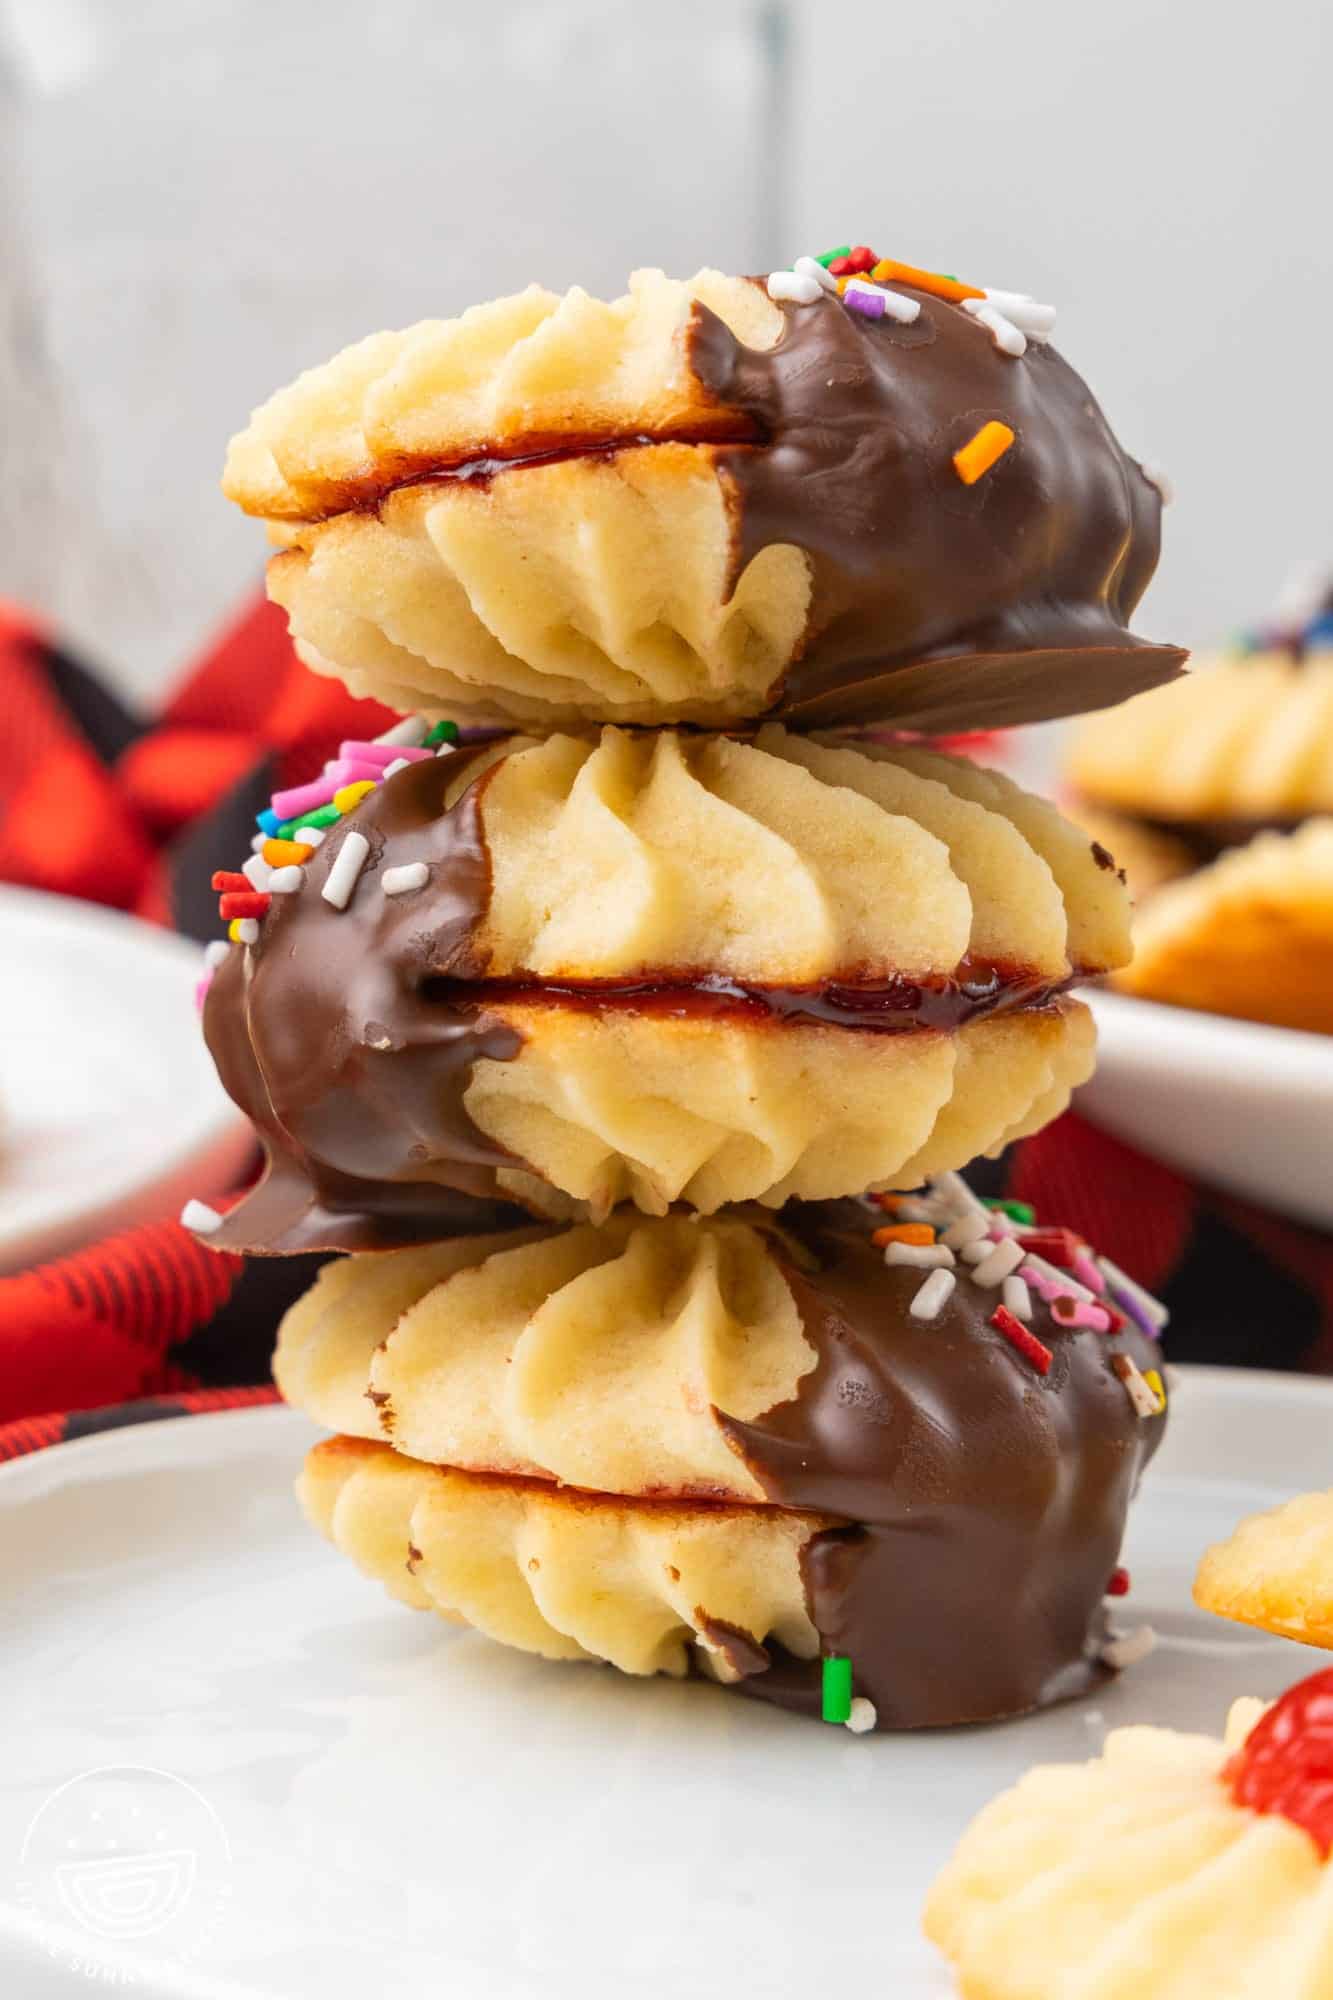 three italian butter cookie sandwiches with jam in the center and the ends dipped in chocolate. Cookies are stacked on top of each other and viewed from the side.